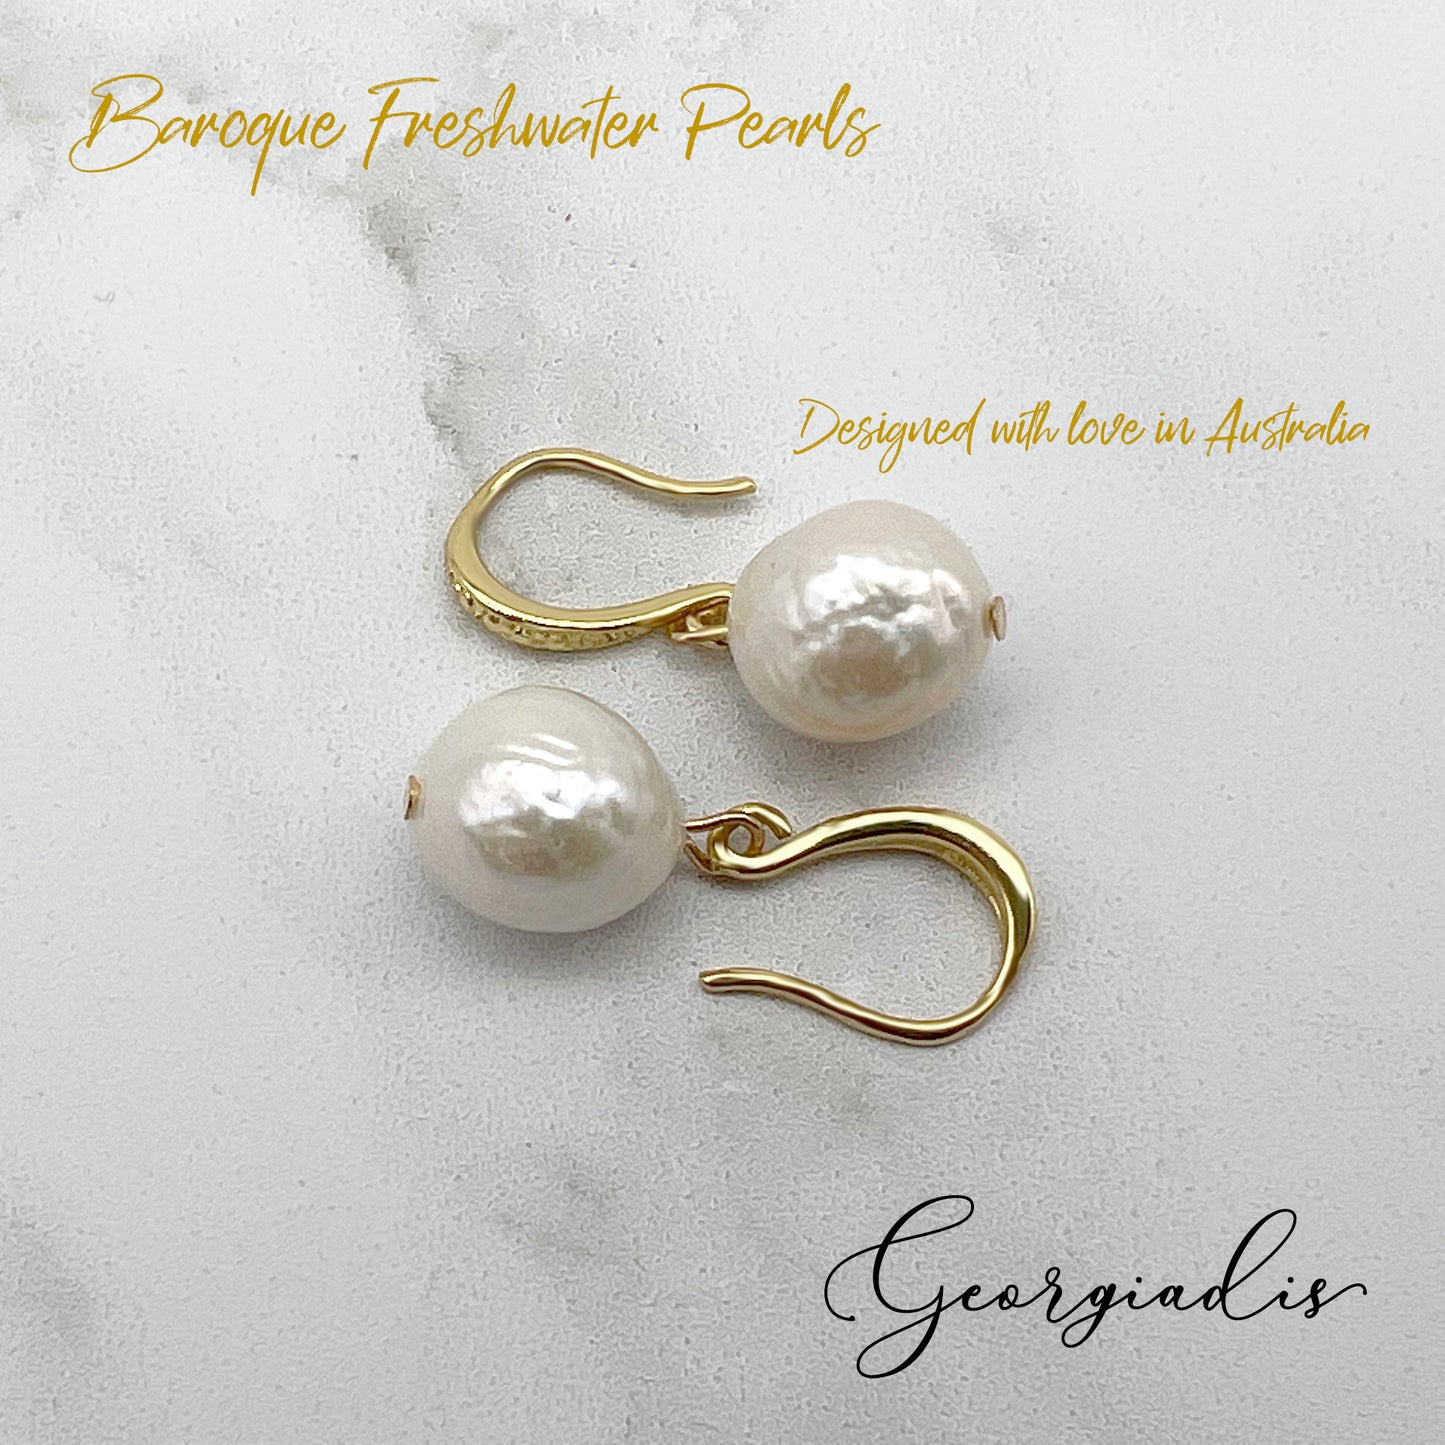 Genuine Baroque Freshwater Pearl Drop Earrings, featuring Grade A, High Lustre White Pearls and 18K Gold Plated, Wealth, Prosperity, Intuition.